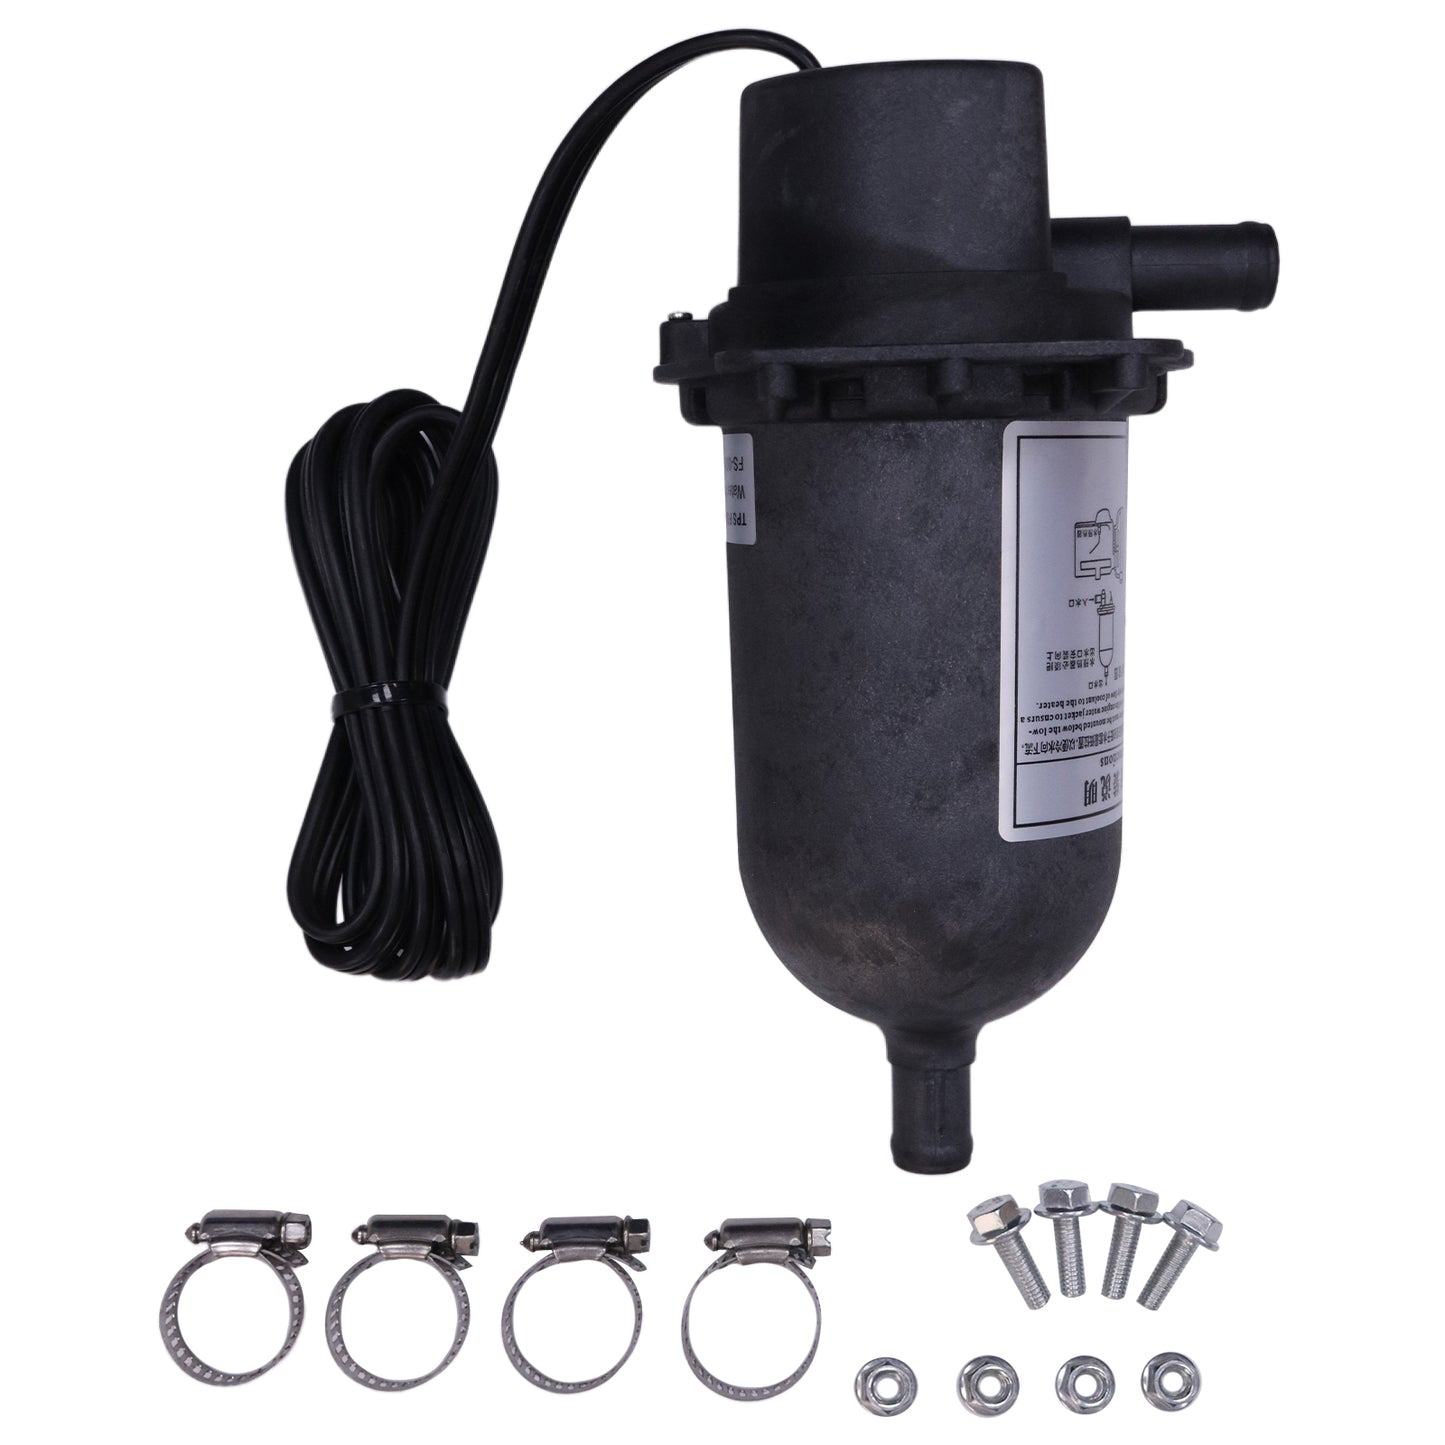 New 1500W 120V Option 100-120F Engine Heater Coolant Pre- Heater TPS151GT10-000 590-893 590893 084918G Compatible with Generators Tractors Buses Trucks Boats Some Cars